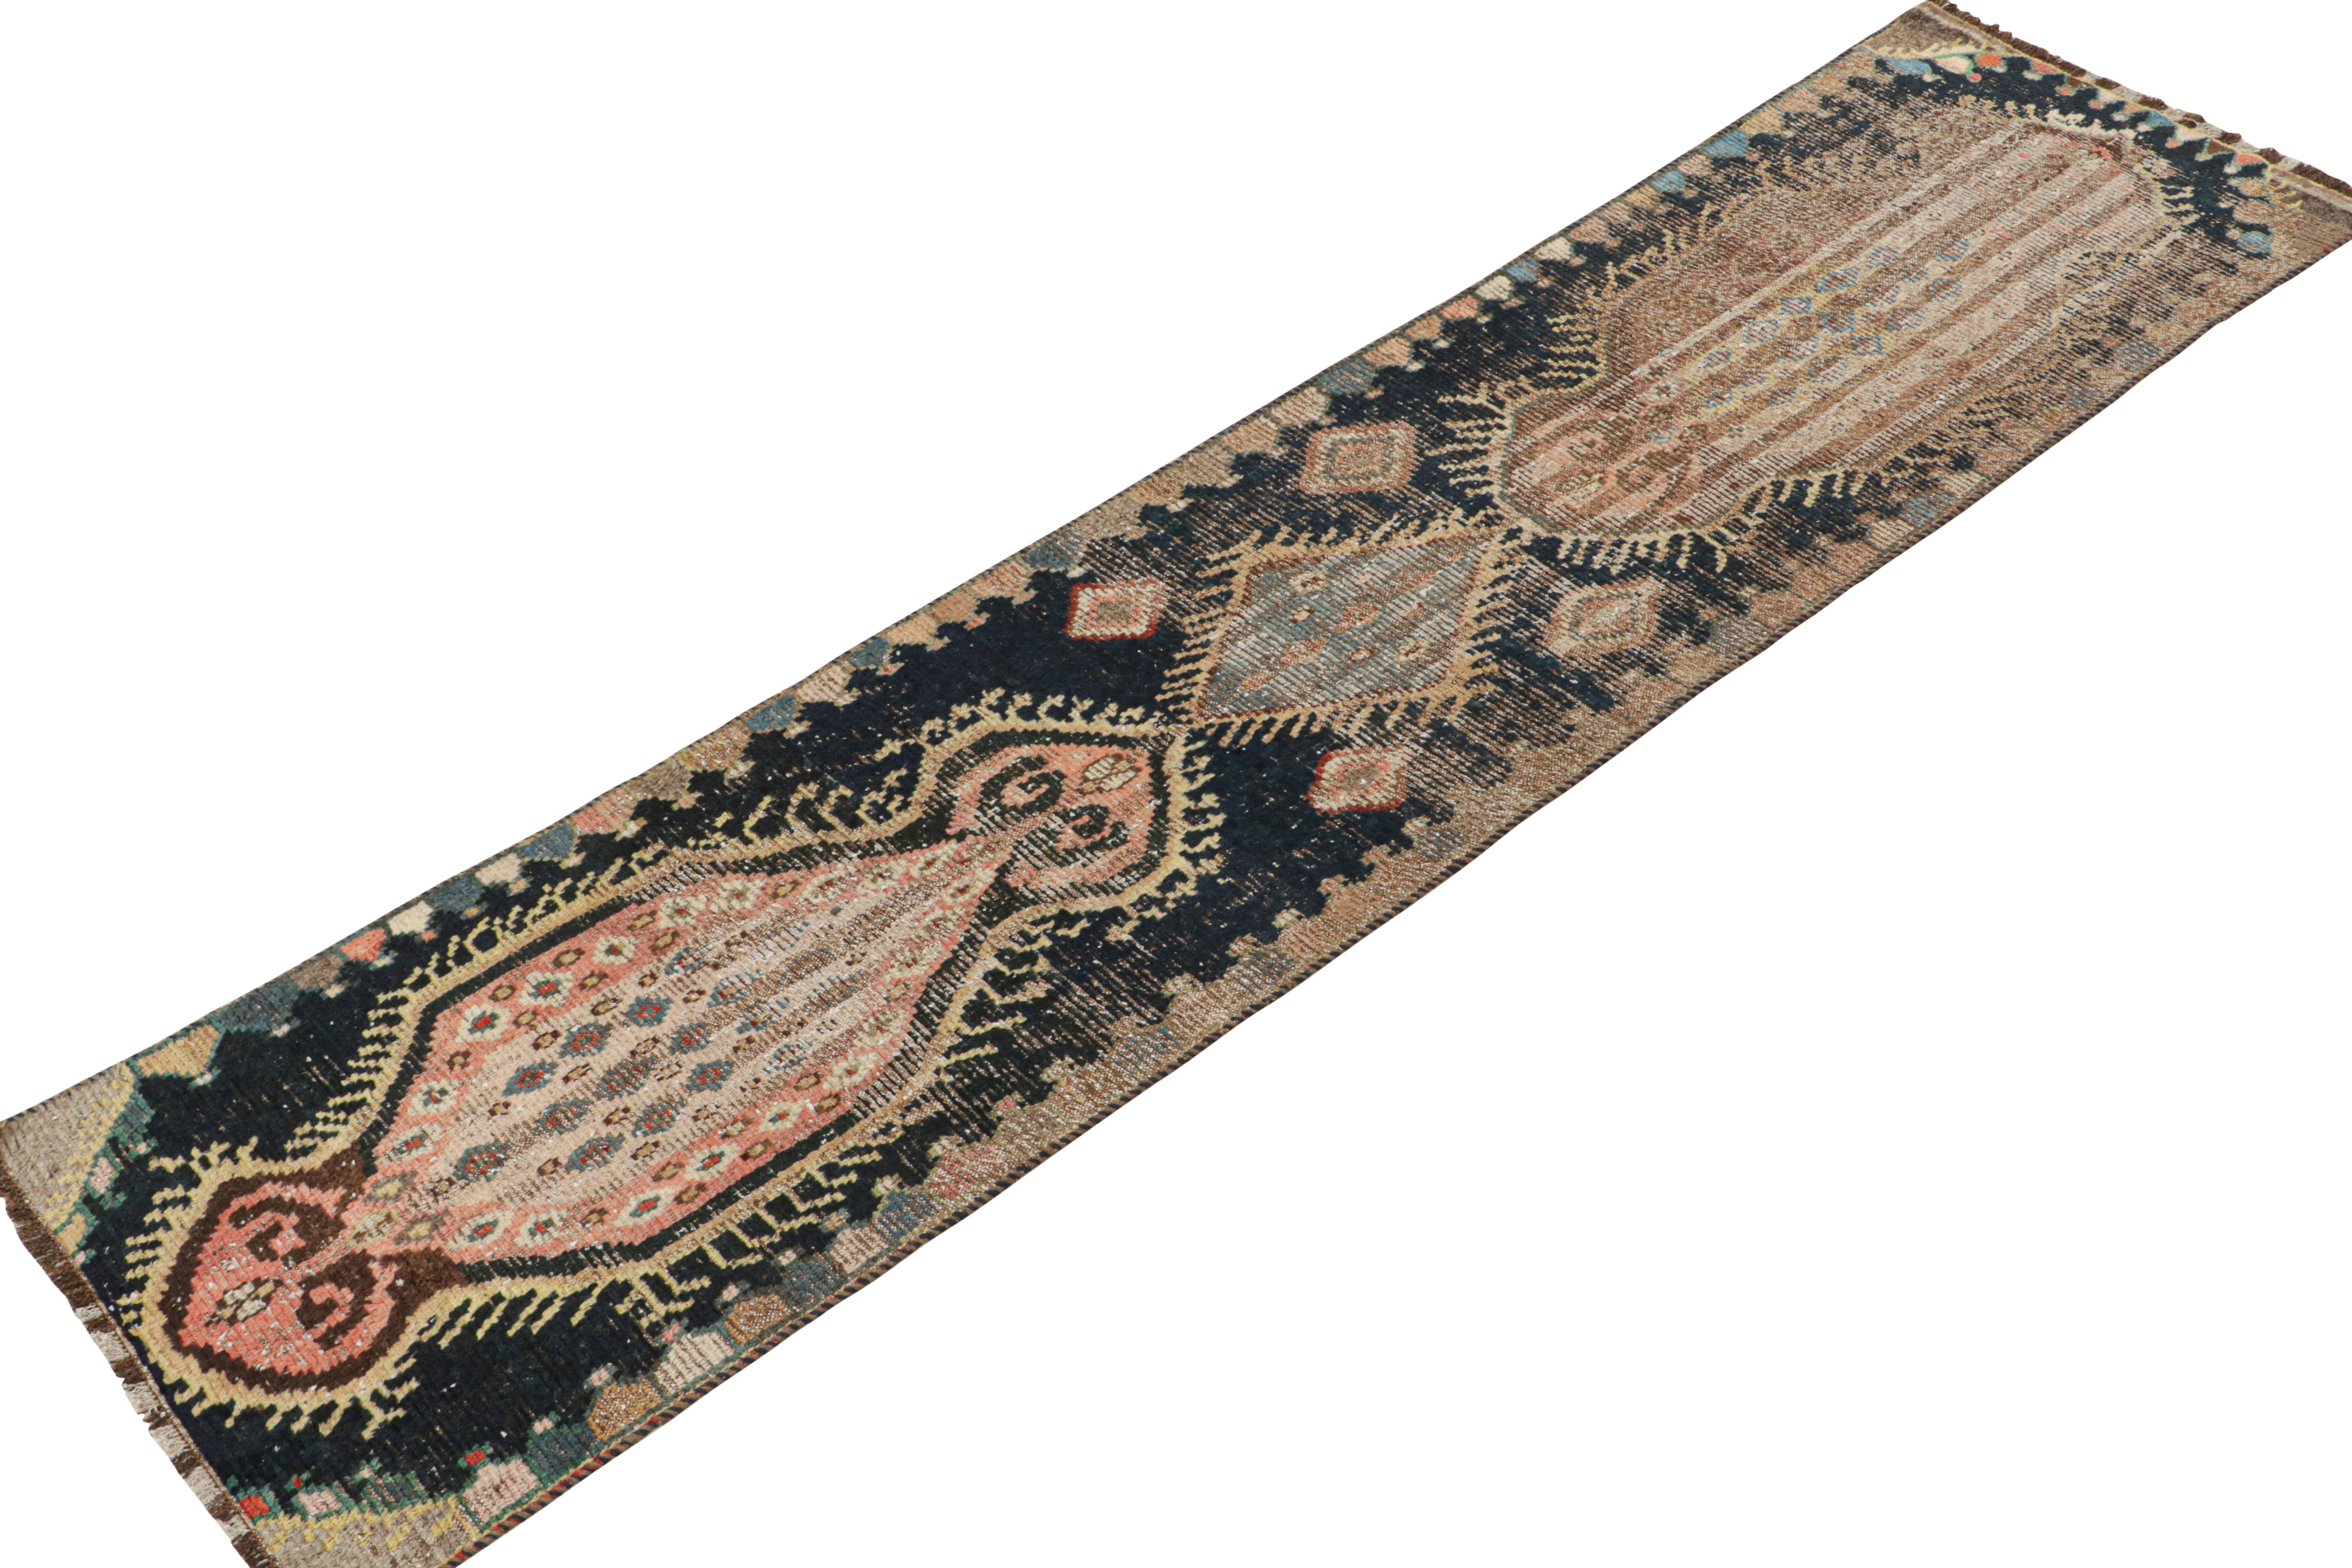 Tribal Vintage Qashqai Persian Gabbeh Runner with Medallion Patterns For Sale